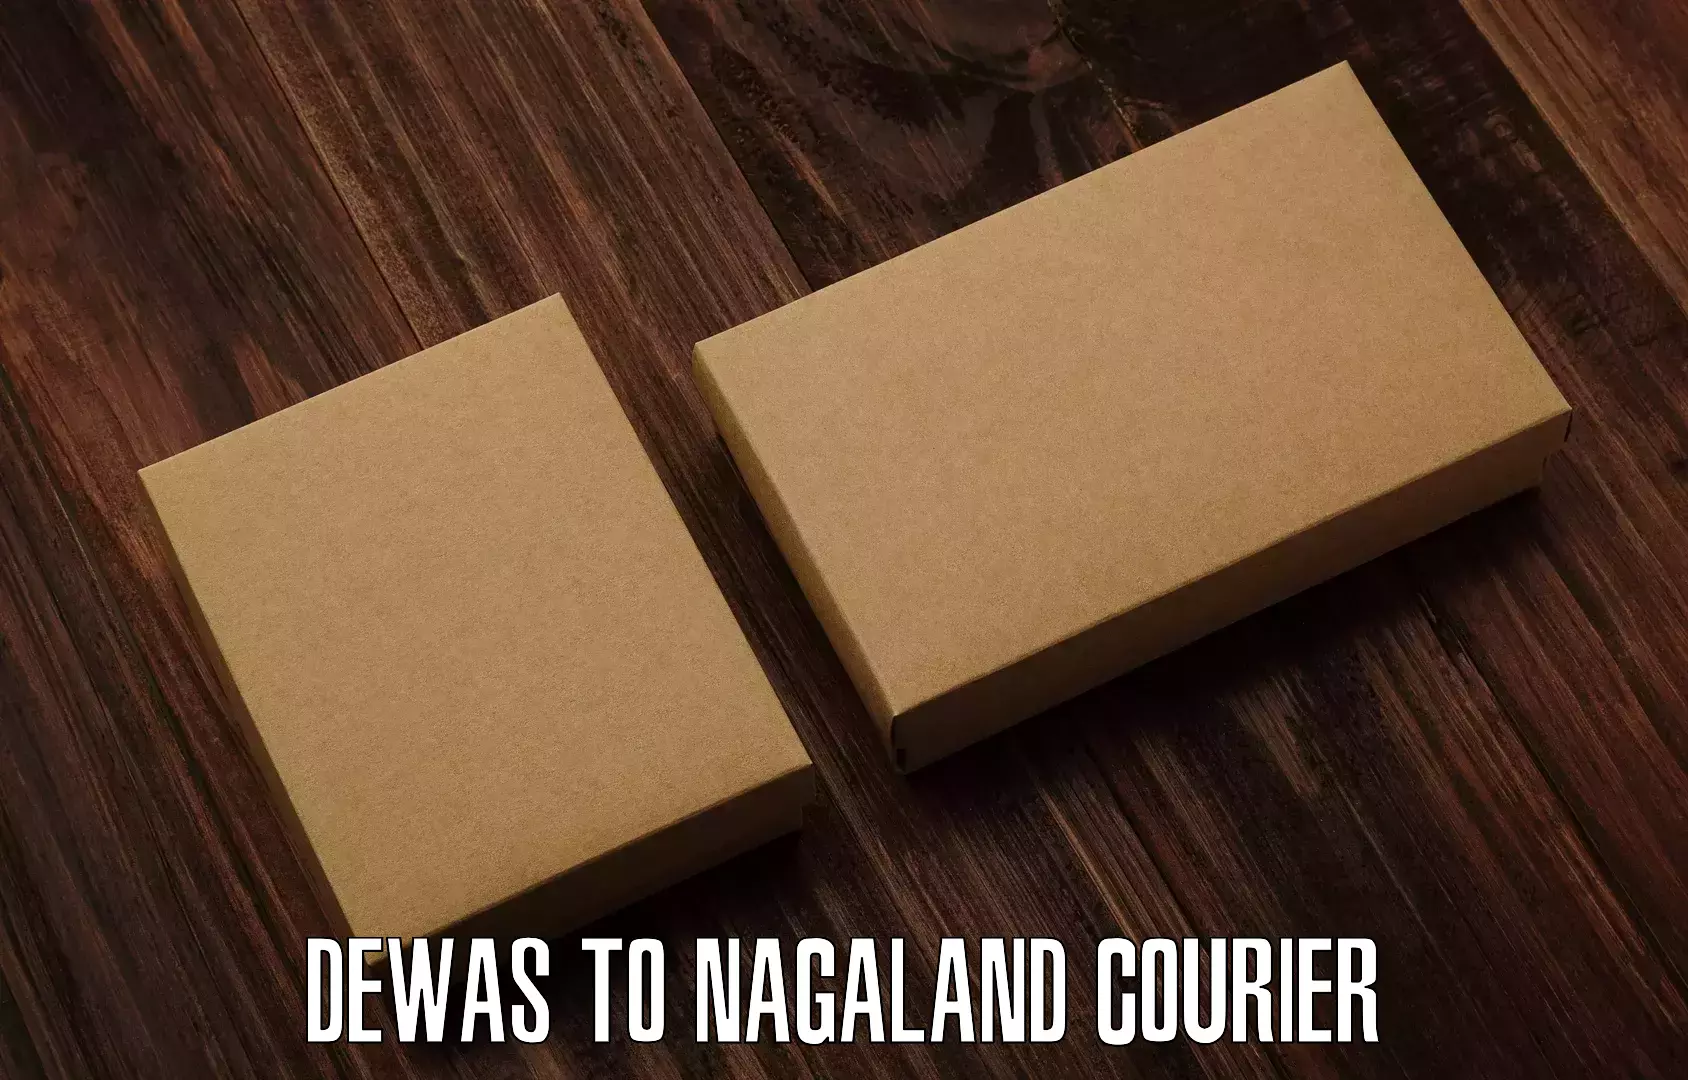 Personal courier services Dewas to Nagaland